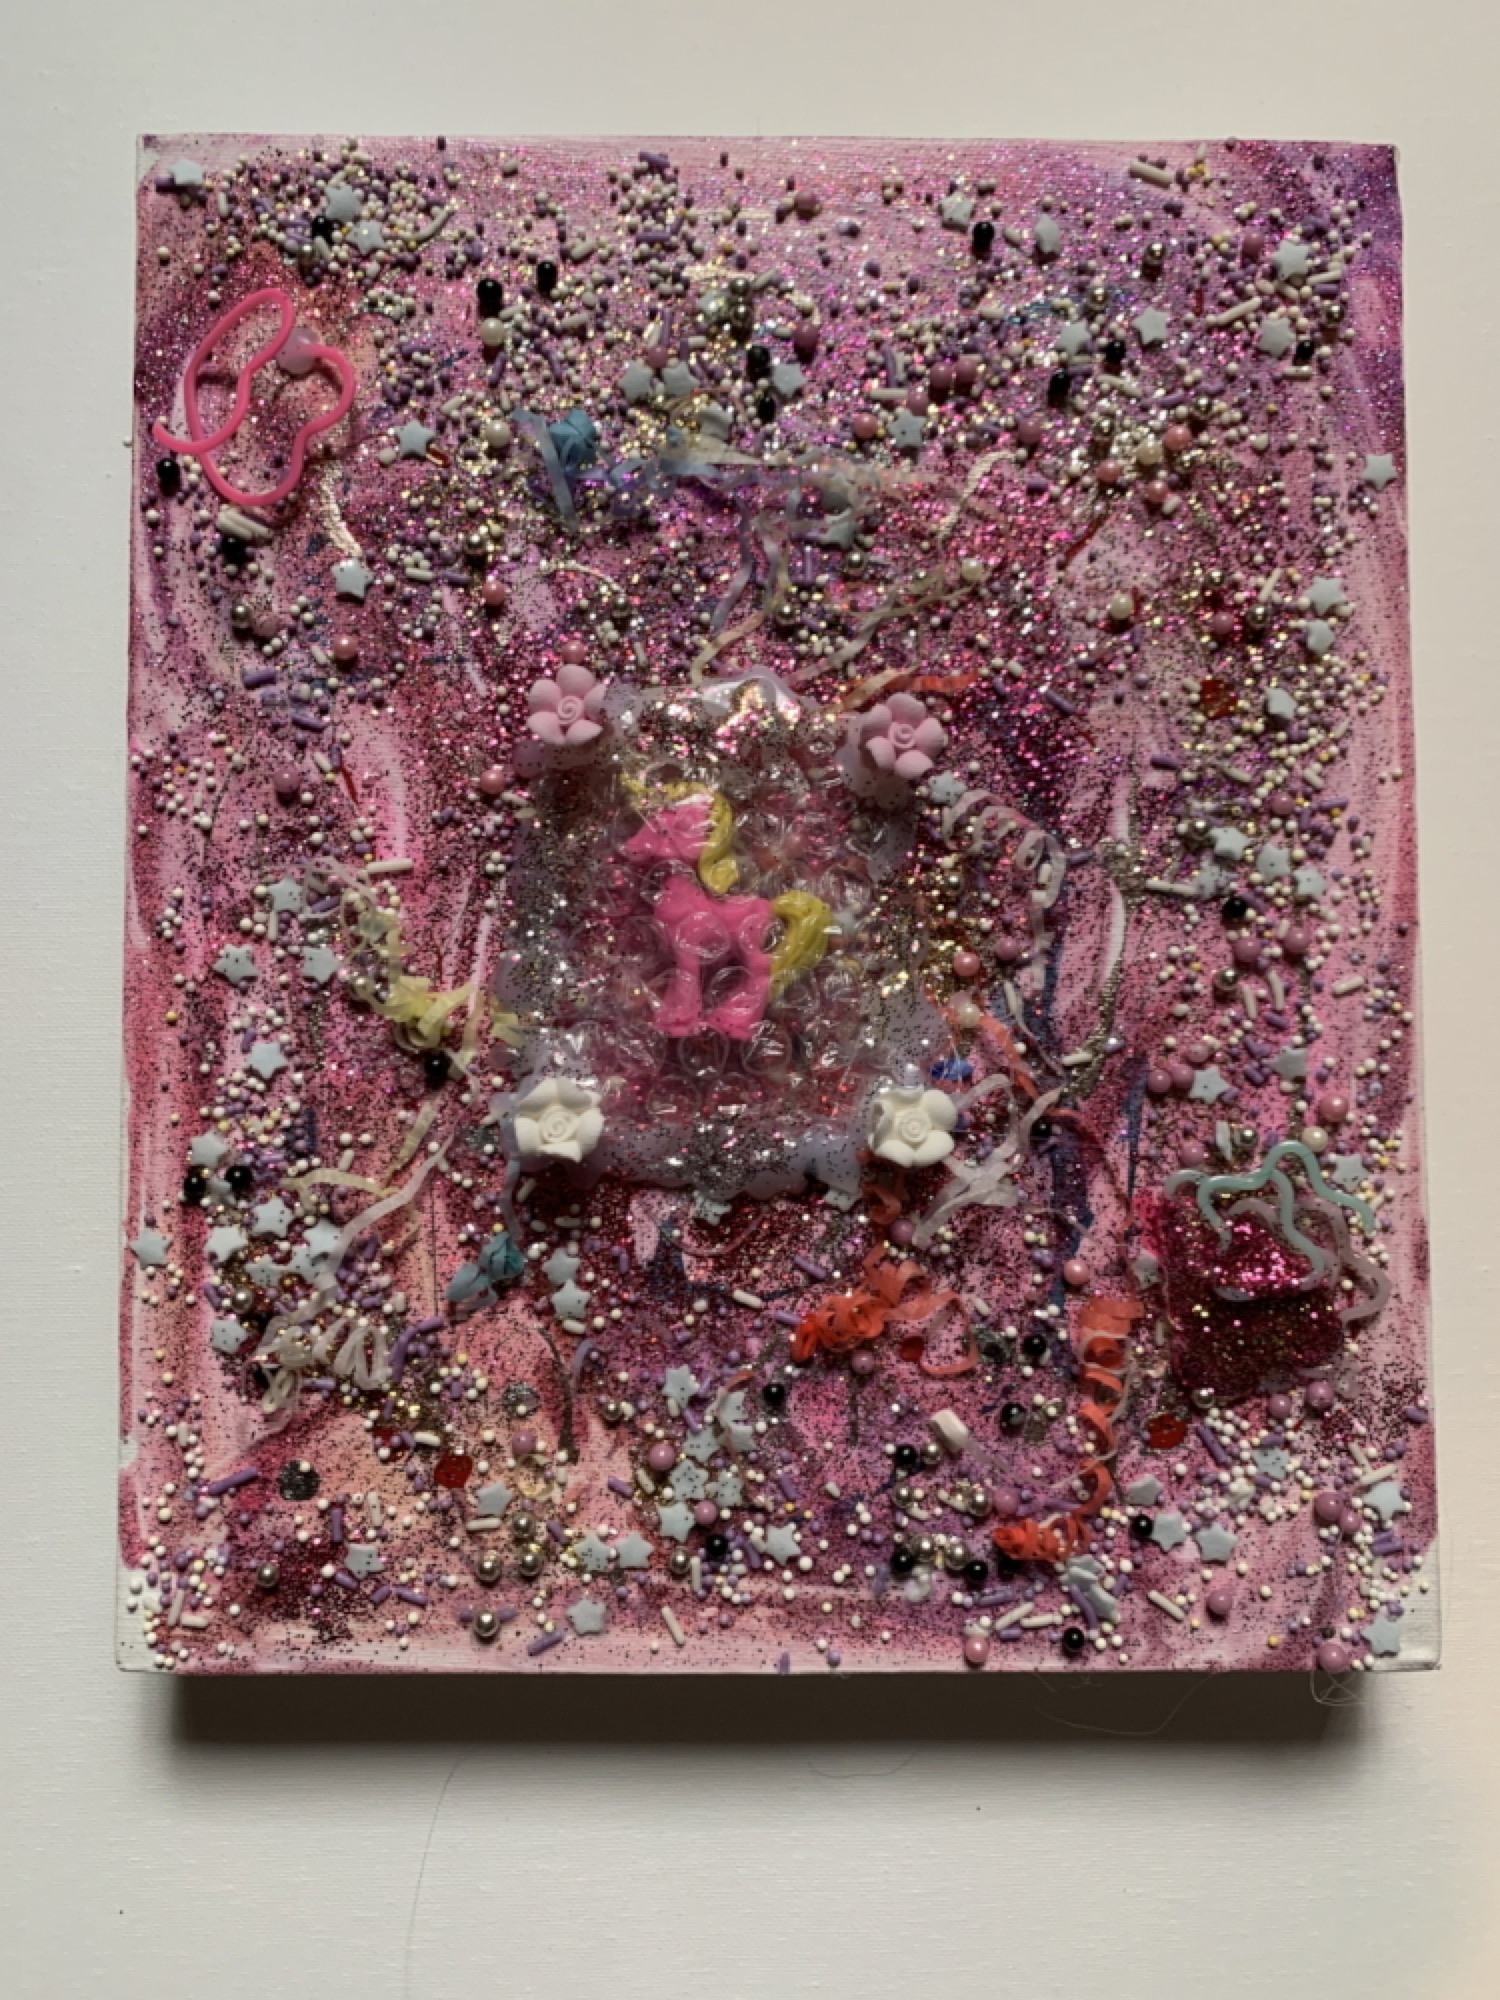 Phoebe Haffenden, <em>EXTINCTION</em>, 2020, lost and found objects, candy glitter and children’s washable glitter paint. Courtesy of the artist.